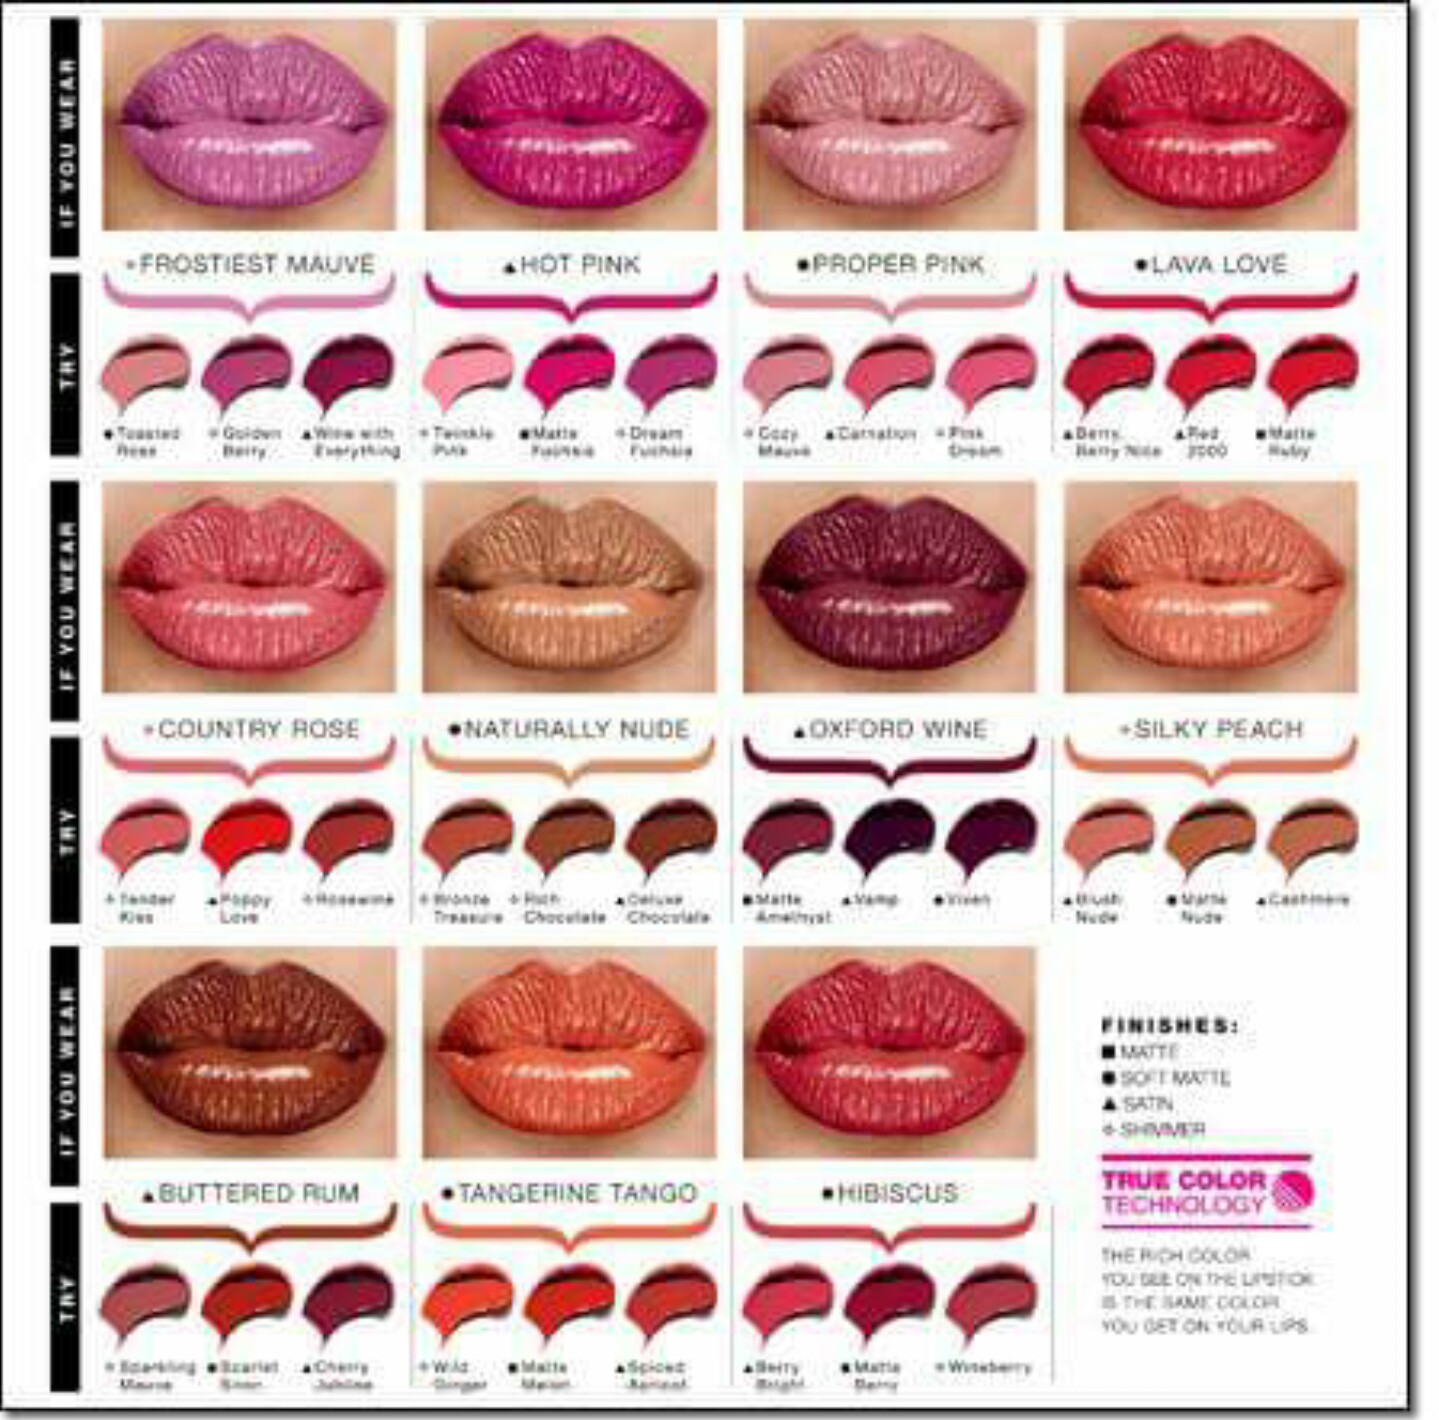 Philocaly (the love of beauty) Blog featuring Avon products.: Great Shades